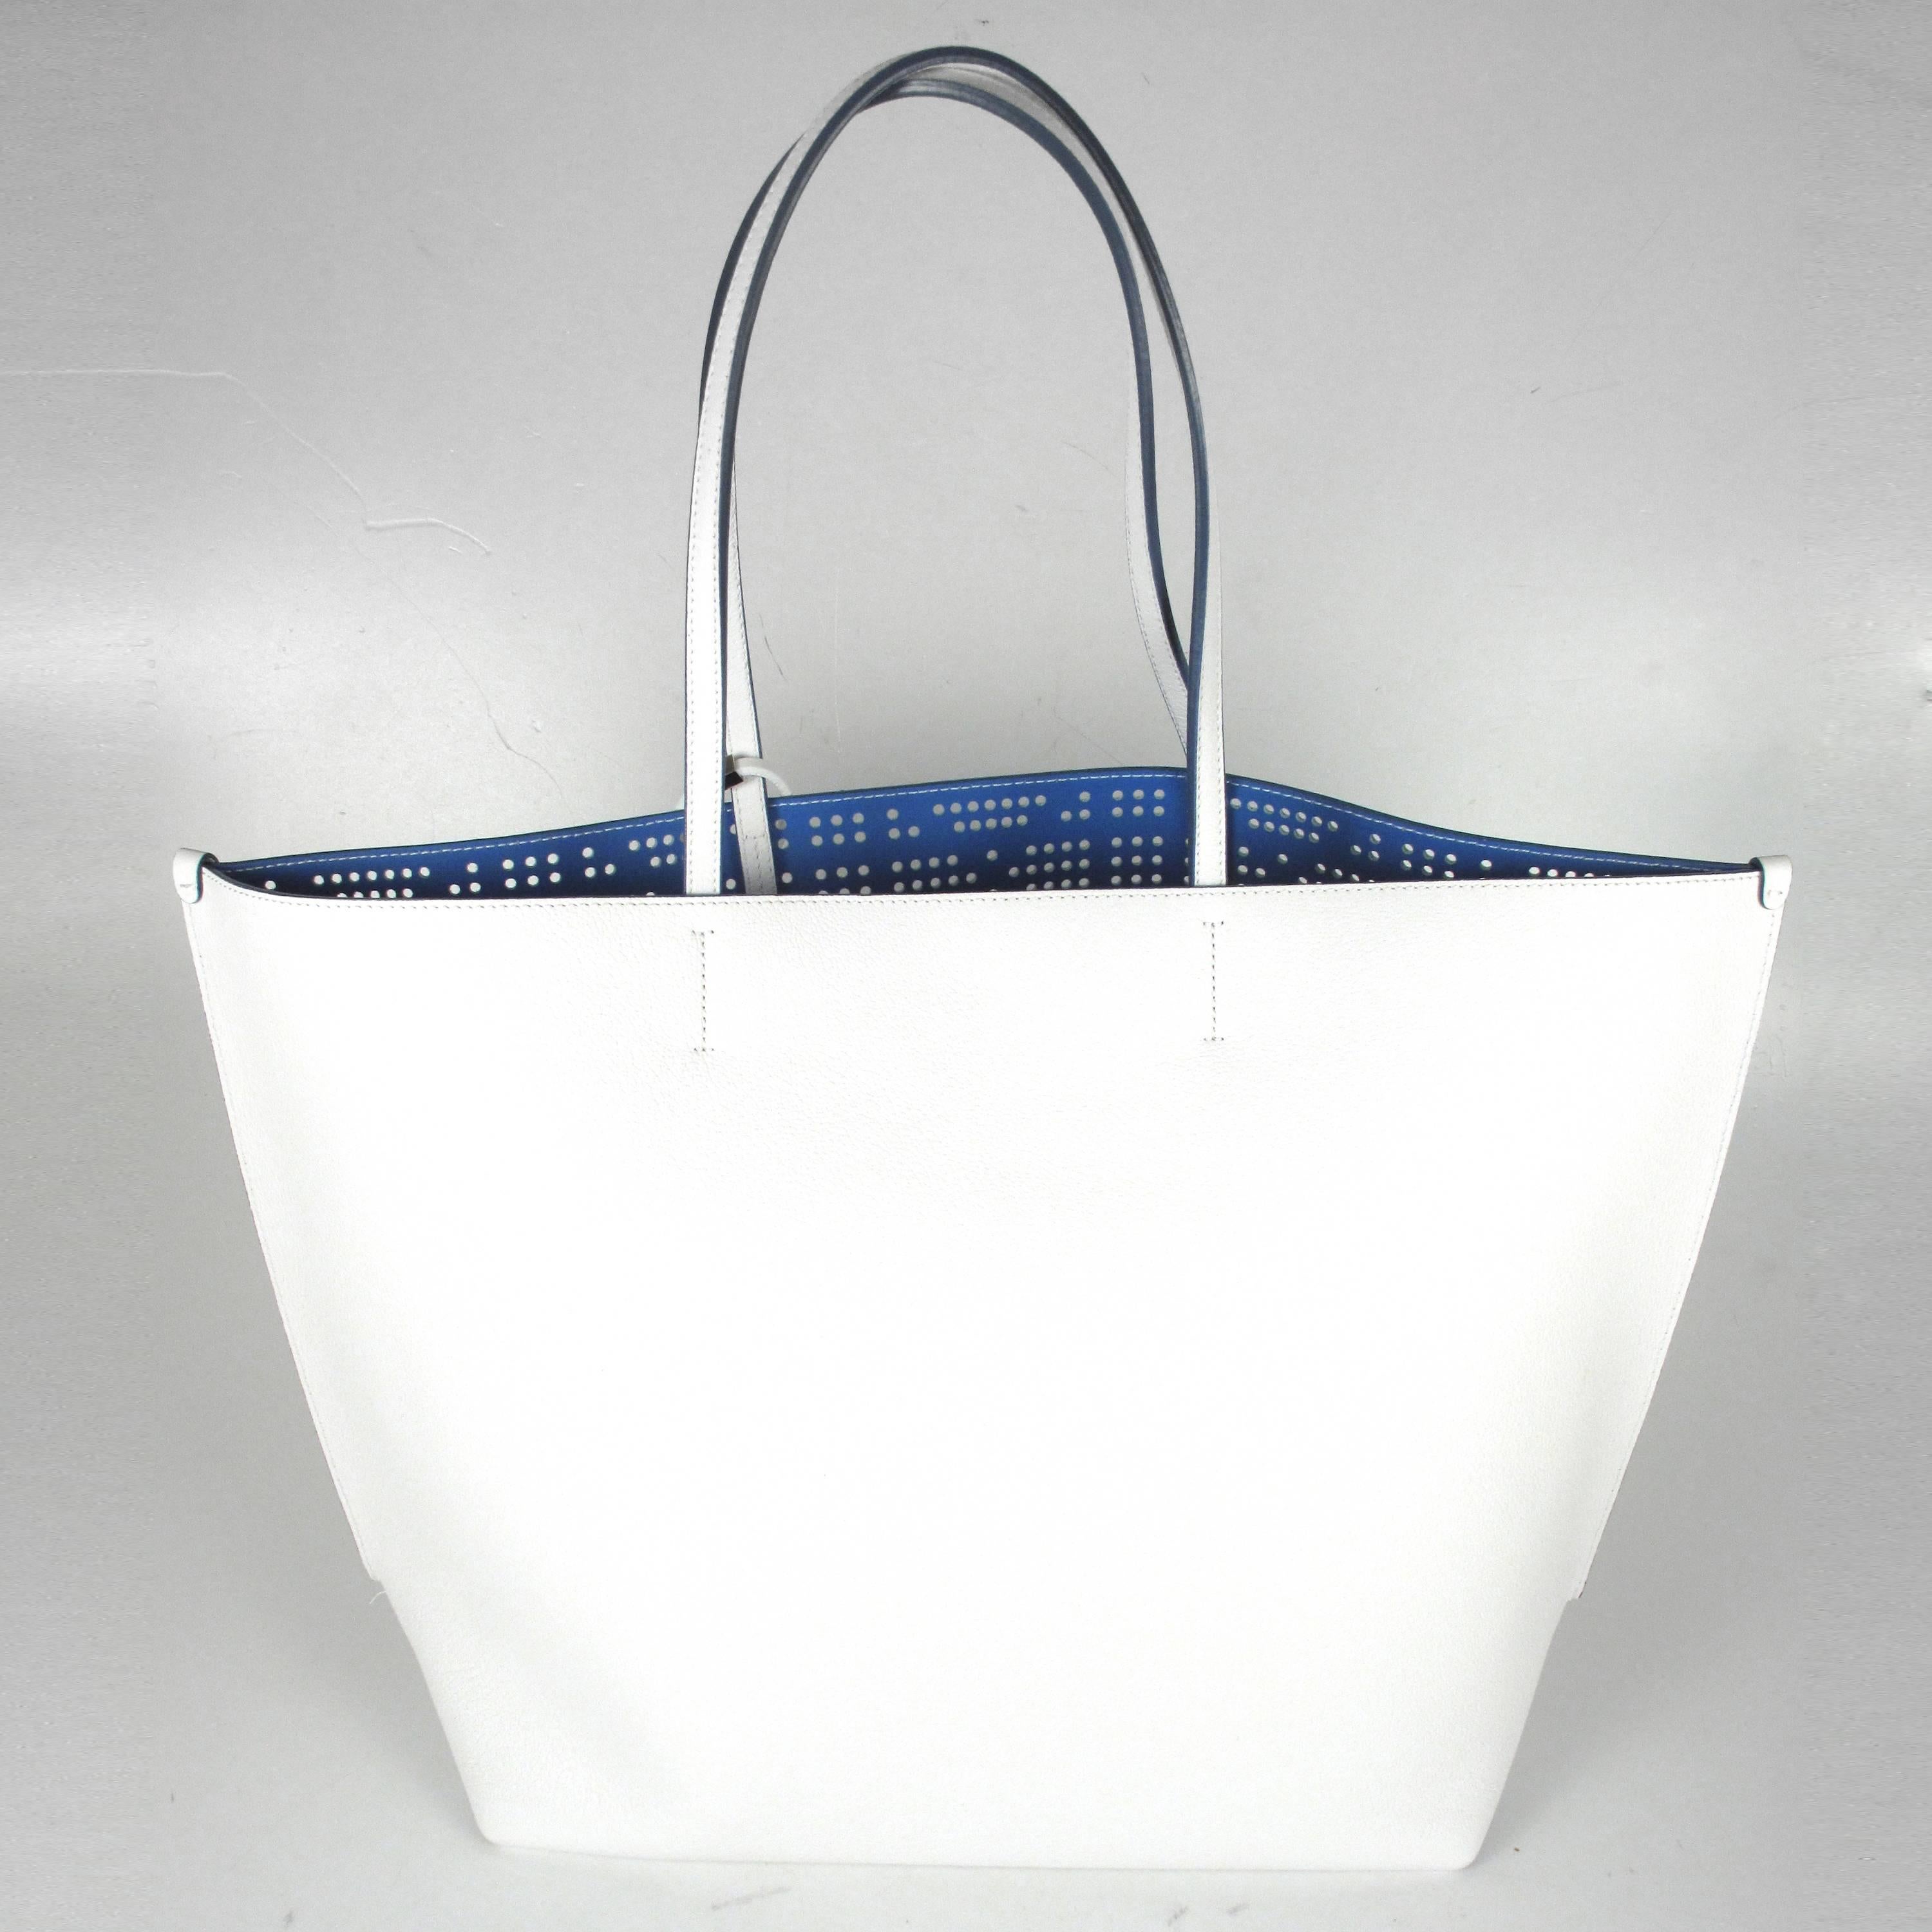 Dior - Dioriva Tote Bag

Color: White

Material: Leather

------------------------------------------------------------

Details:

- blue lining

- dior letter charms - multicolored

- perforated leather at front

- interior snap